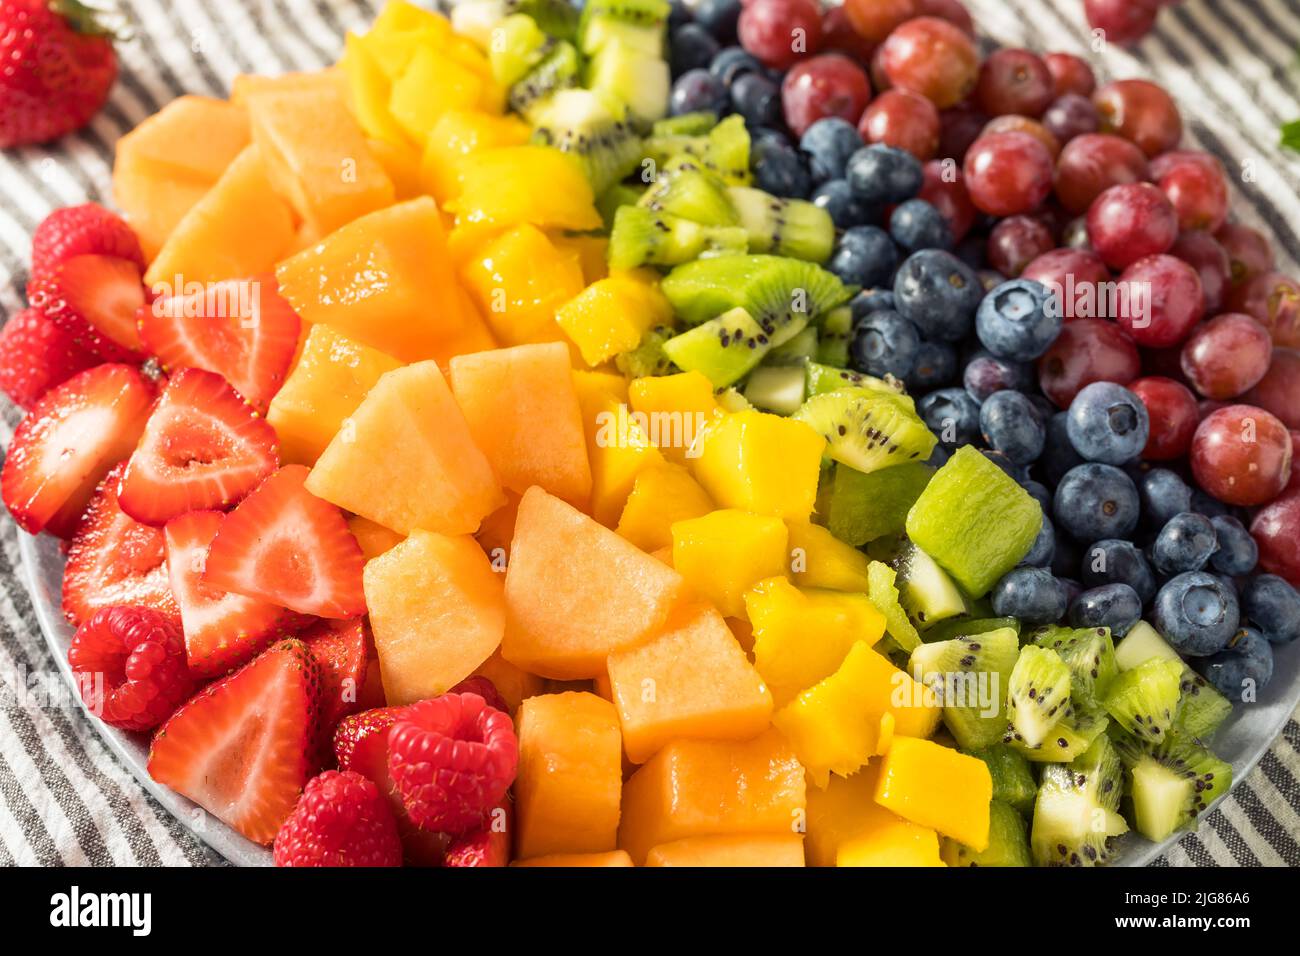 Raw Organic Rainbow Fruit Salad with Berries Melons and Grapes Stock Photo